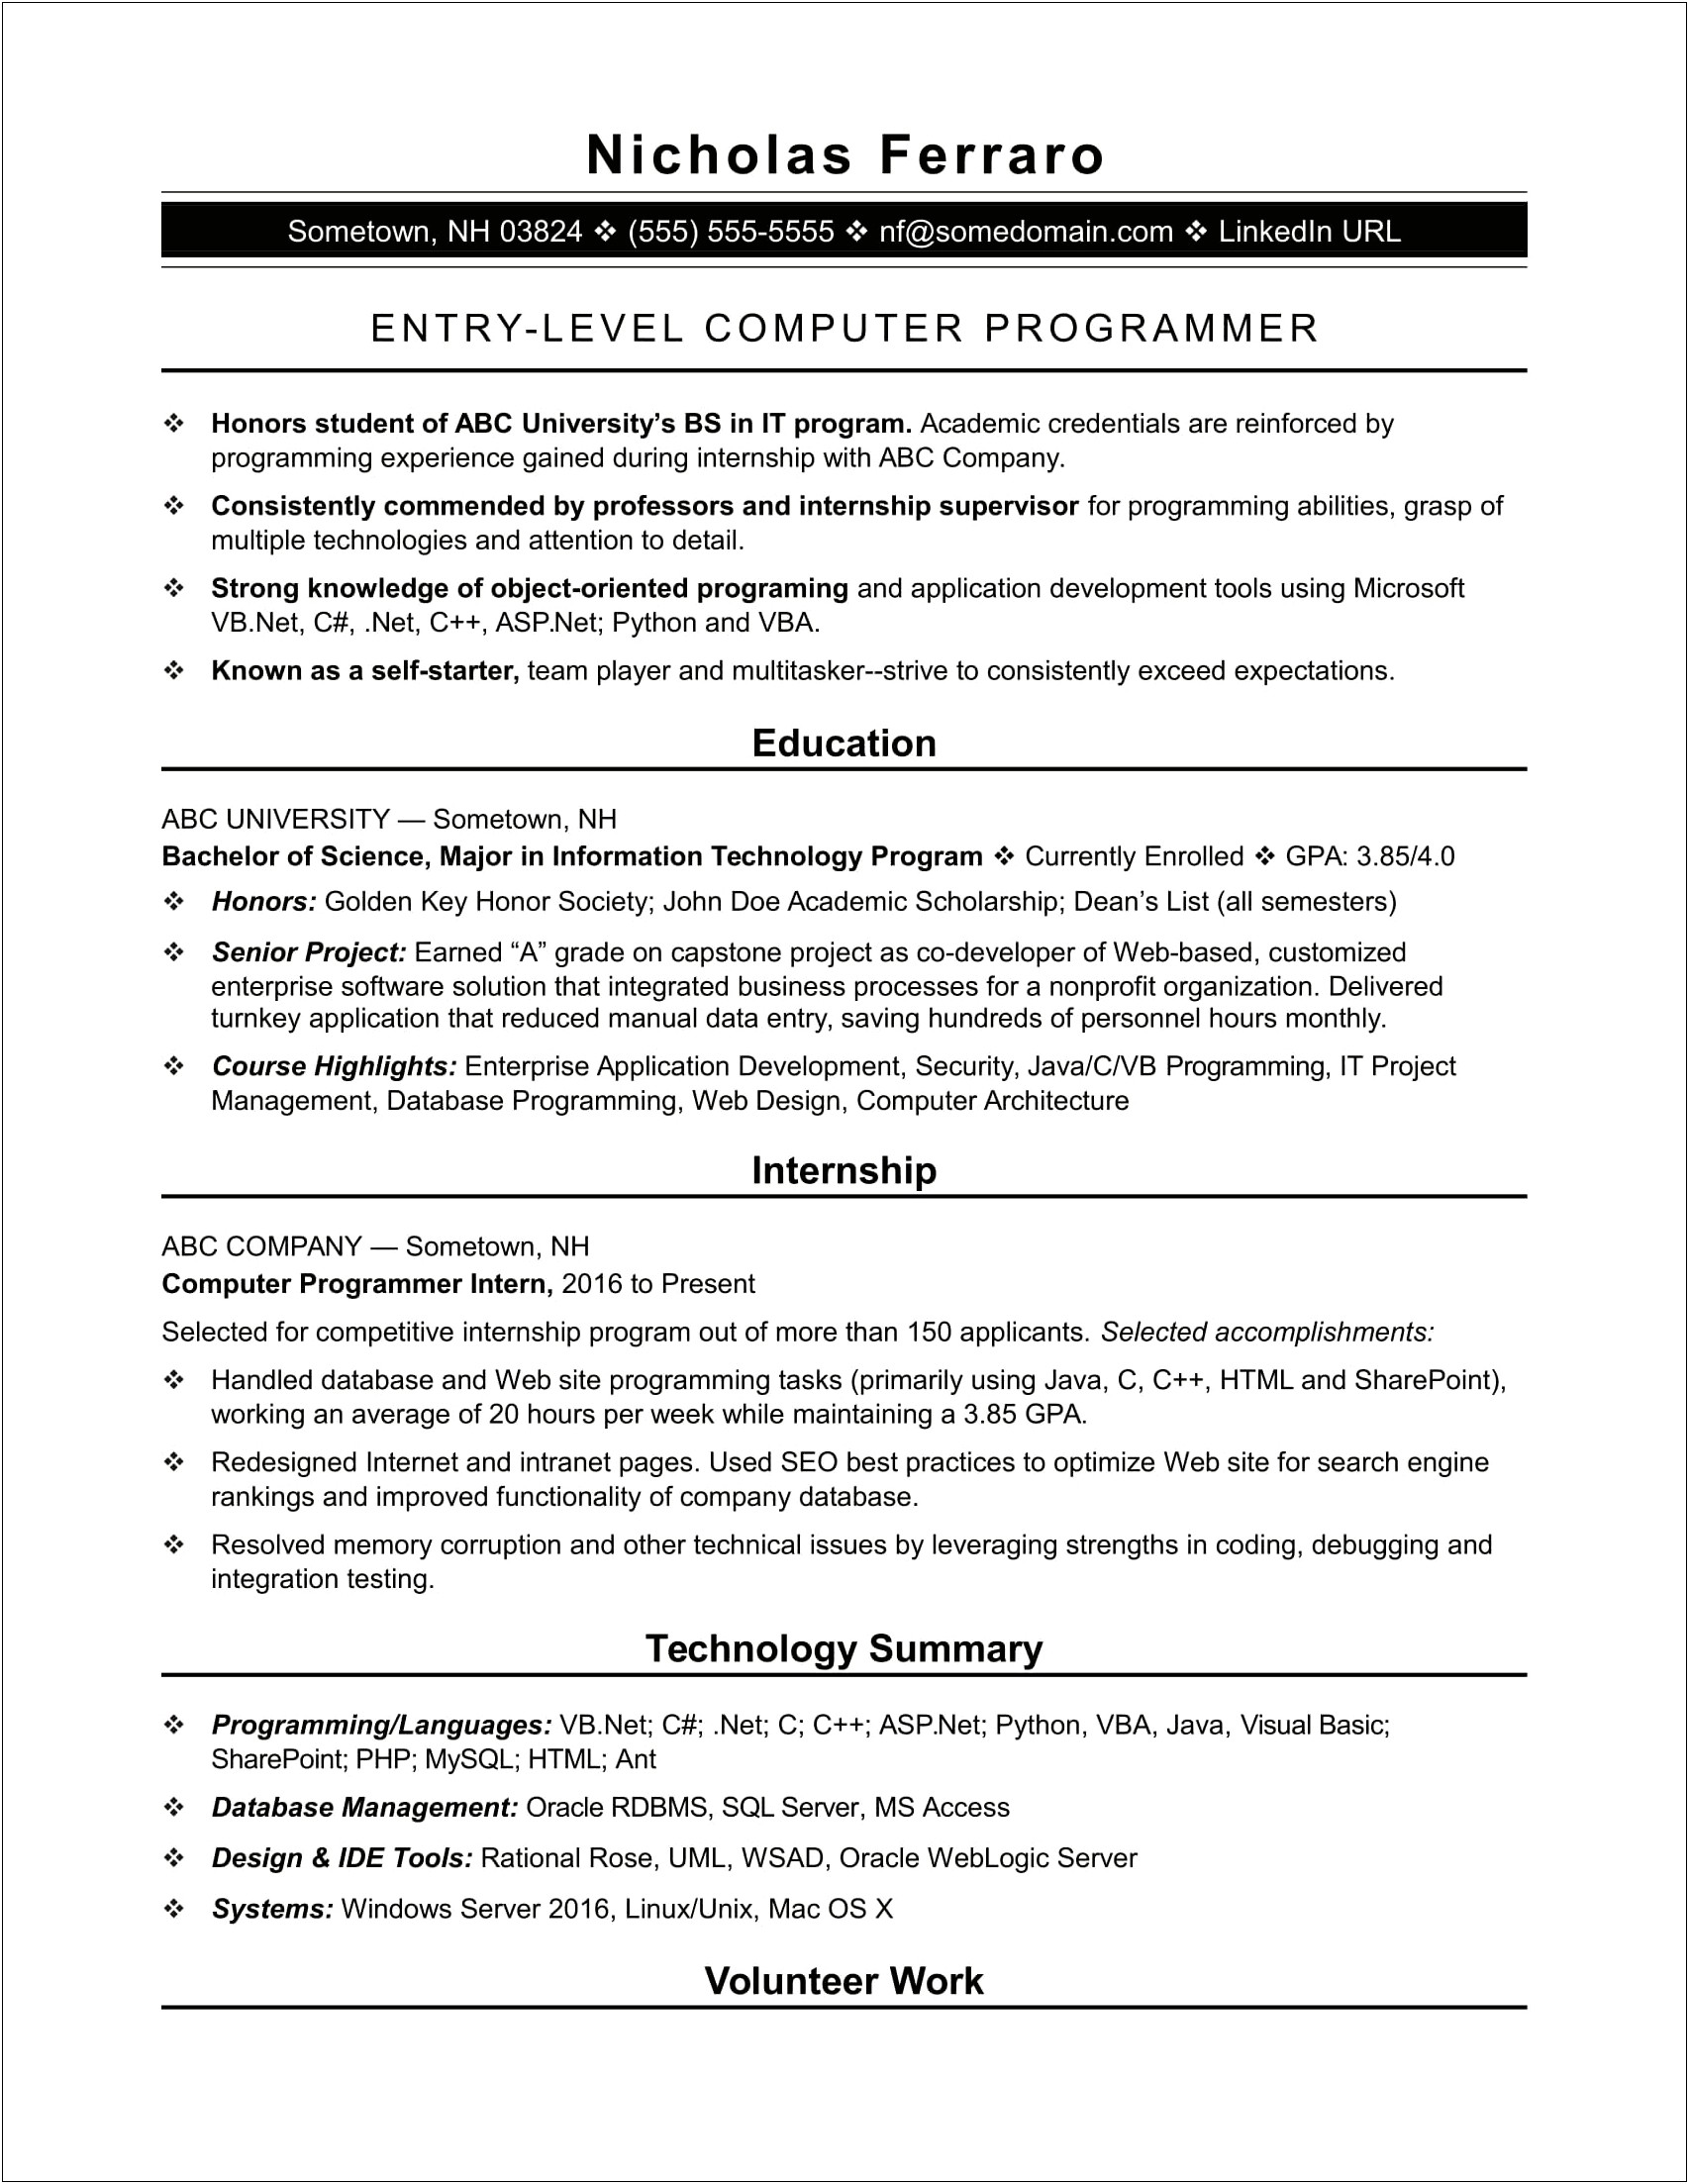 Programming Languages Best Way To List On Resume